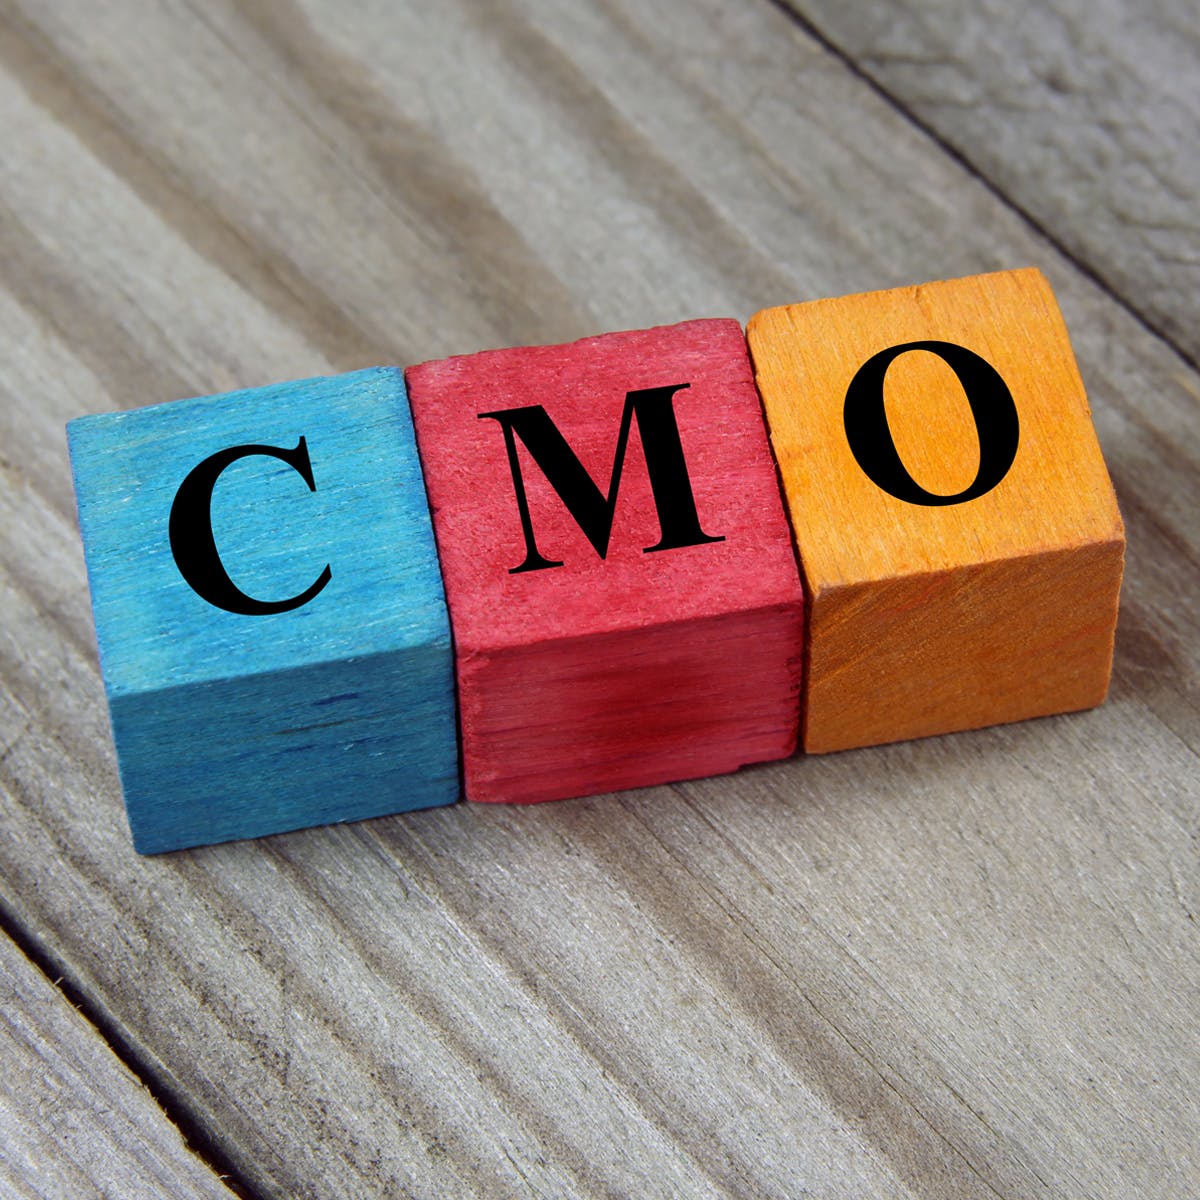 7 Signs Your Business Needs A Fractional Chief Marketing Officer (CMO)